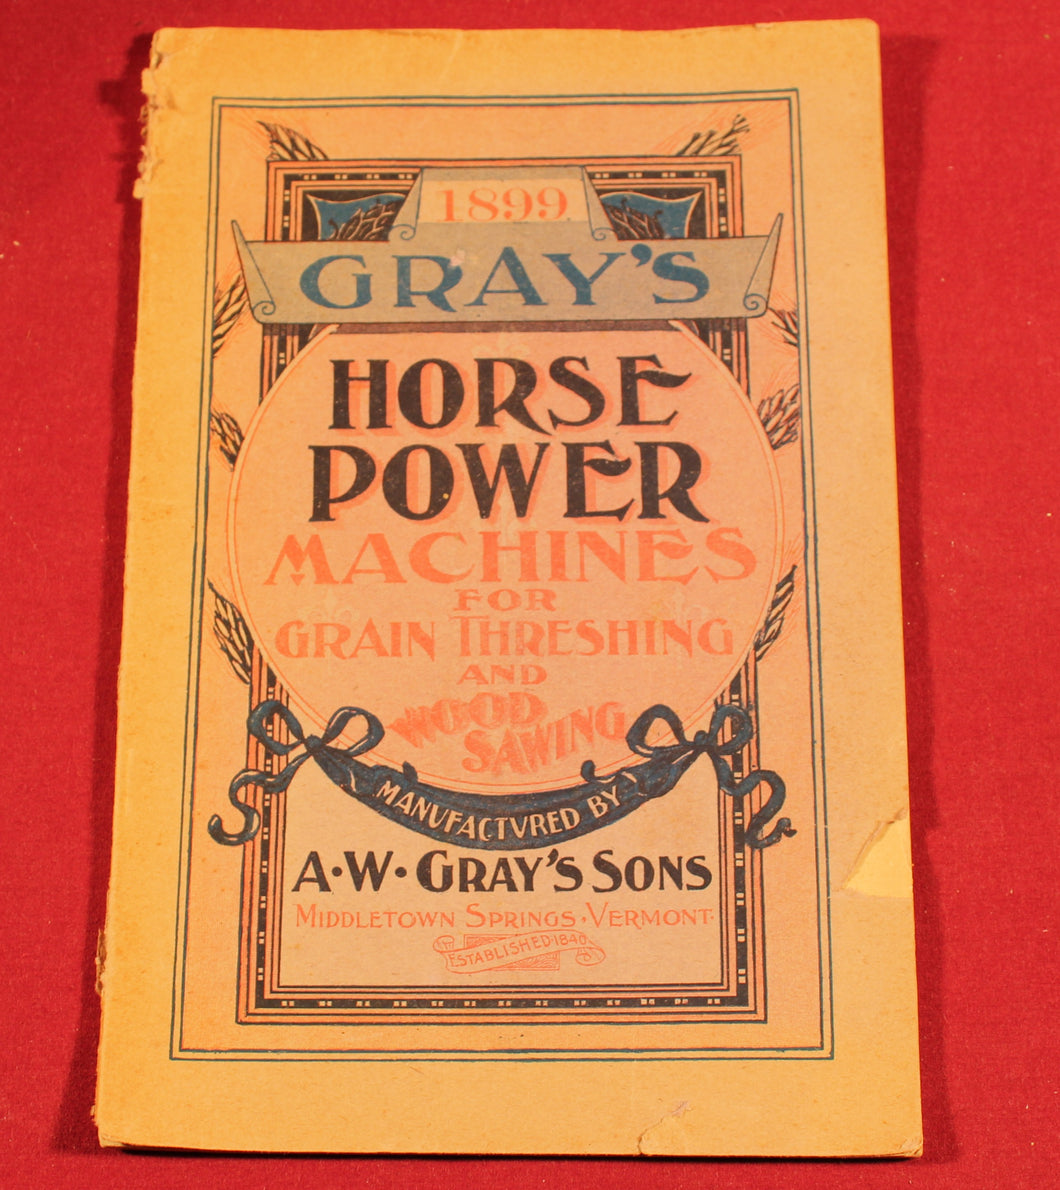 1899 Catalogue of Gray's Horse Power Machines for Grain Threshing and Wood Sawing